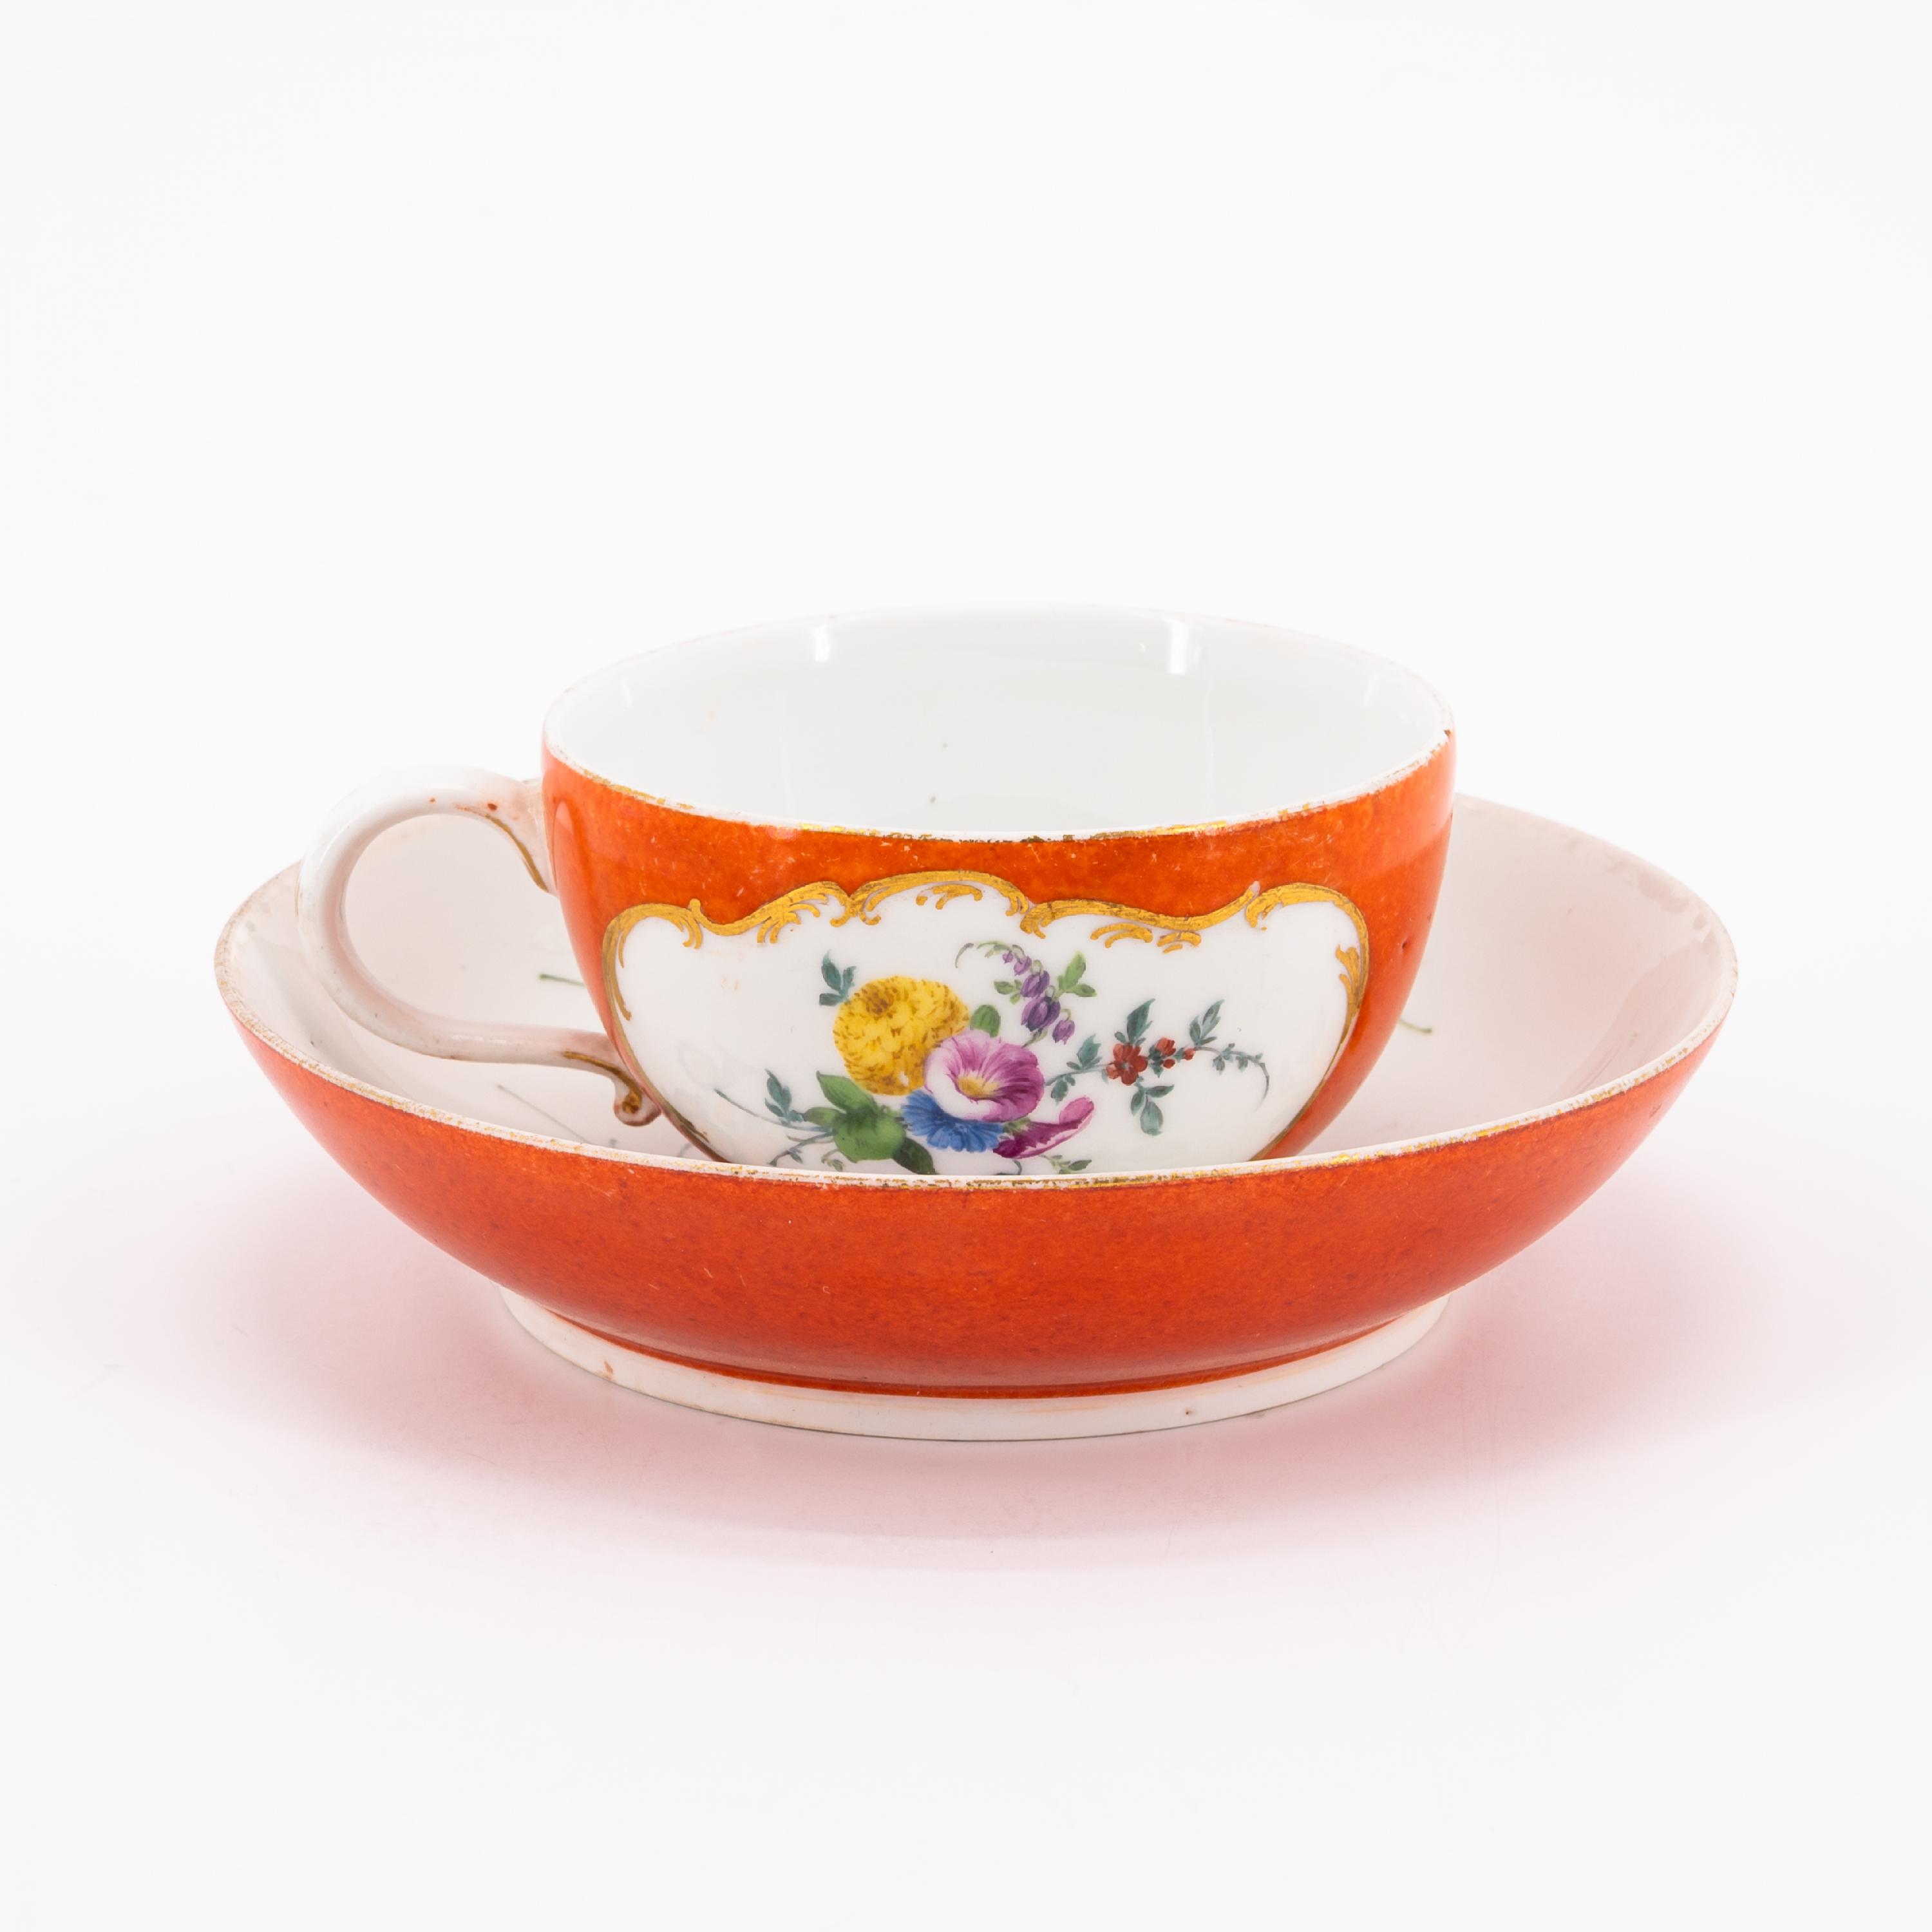 TWO PORCELAIN CUPS AND SAUCERS WITH YELLOW AND ORANGE COLOURED GROUND AS WELL AS FLORAL DECOR - Image 8 of 11